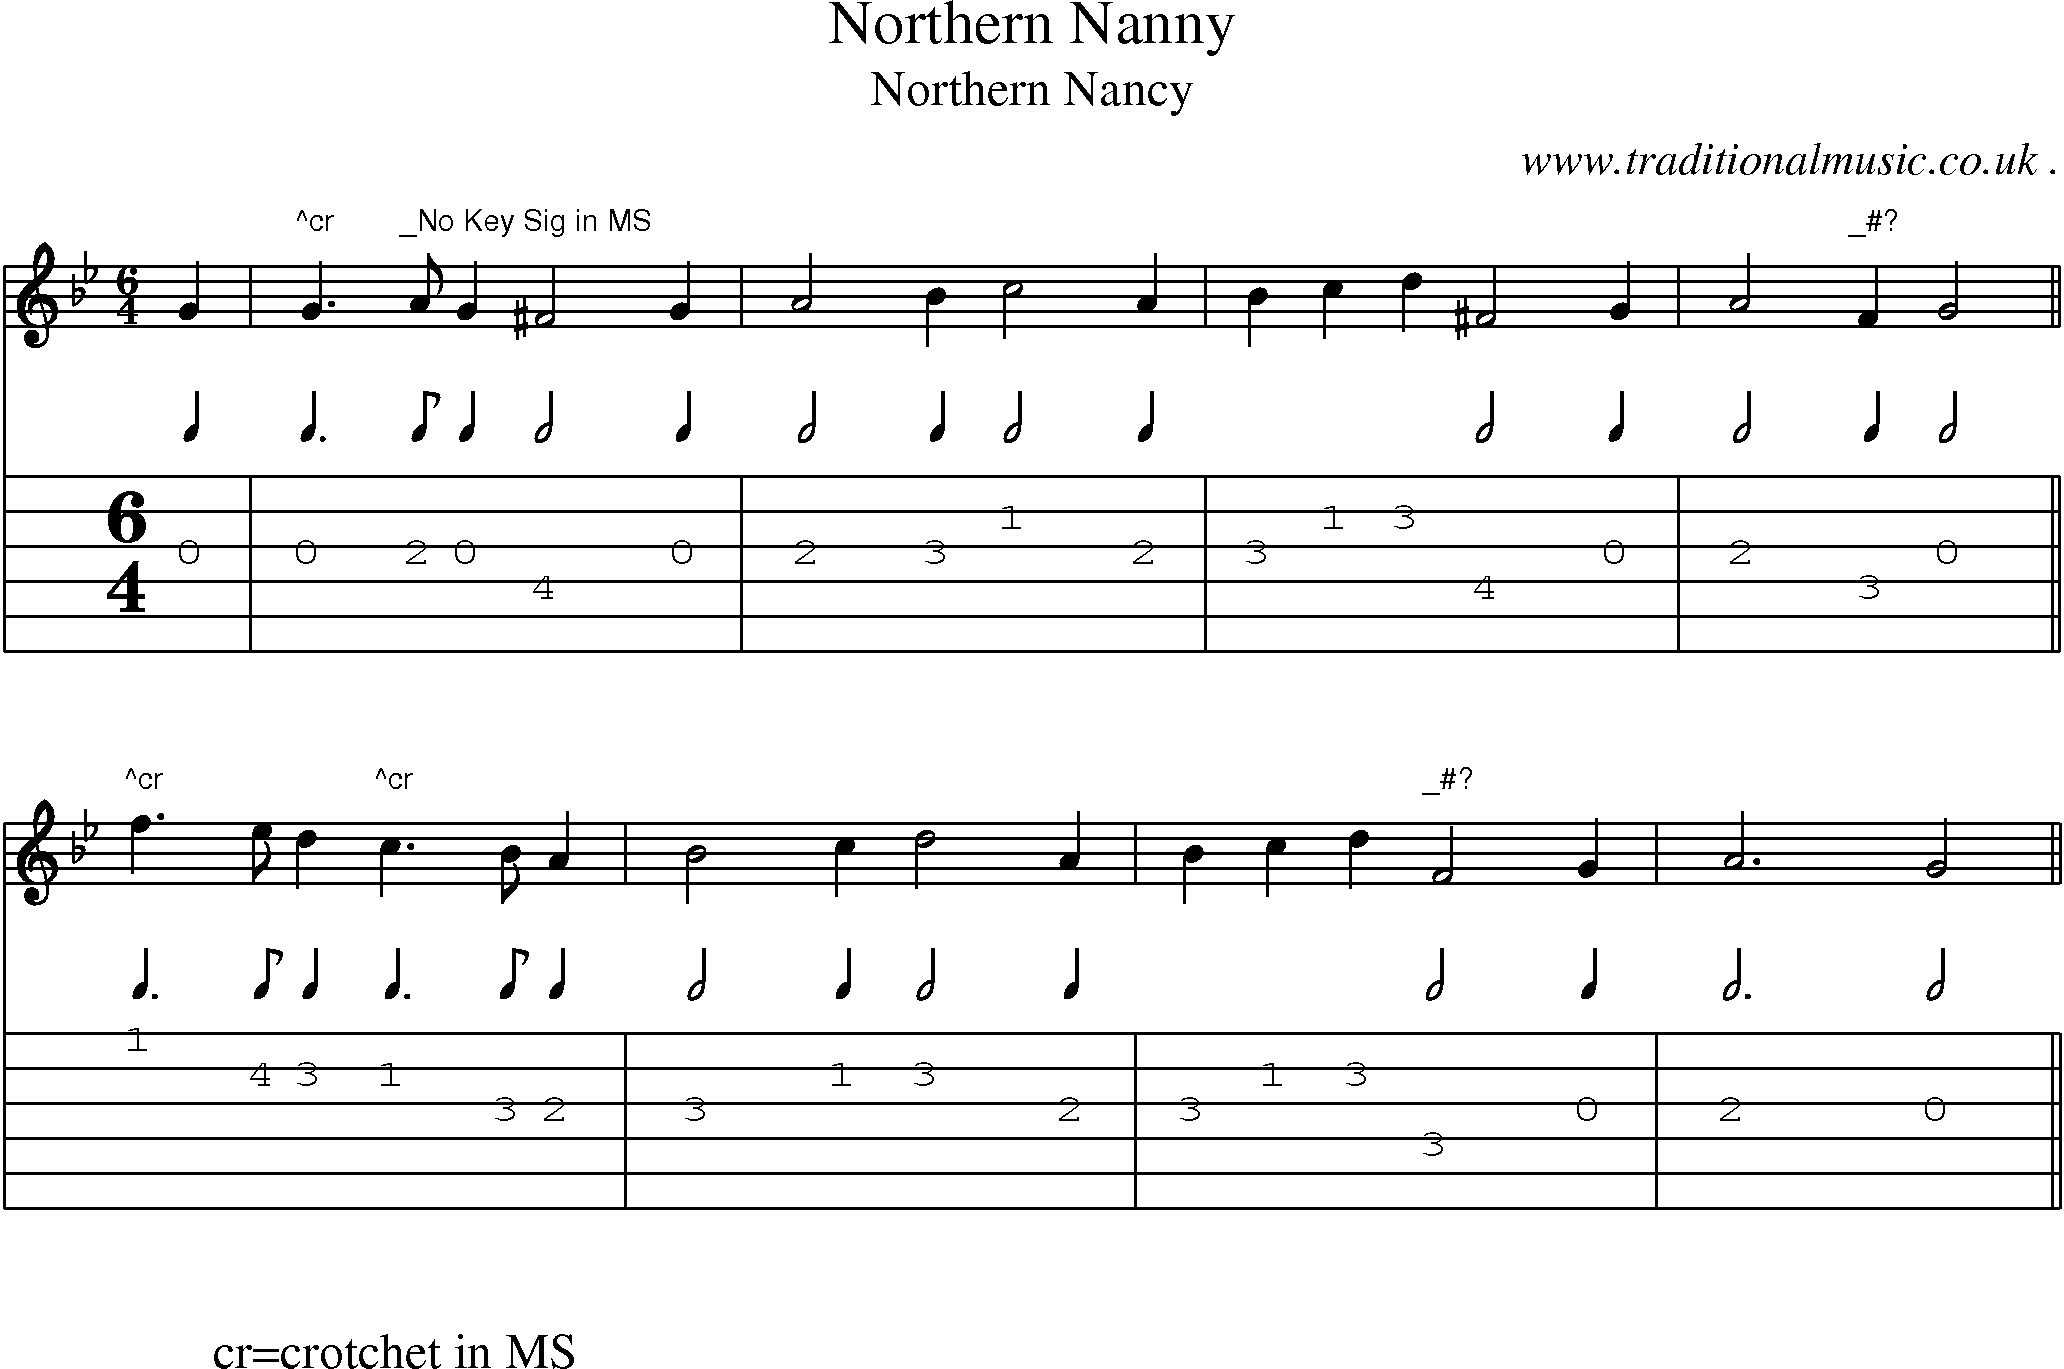 Sheet-Music and Guitar Tabs for Northern Nanny